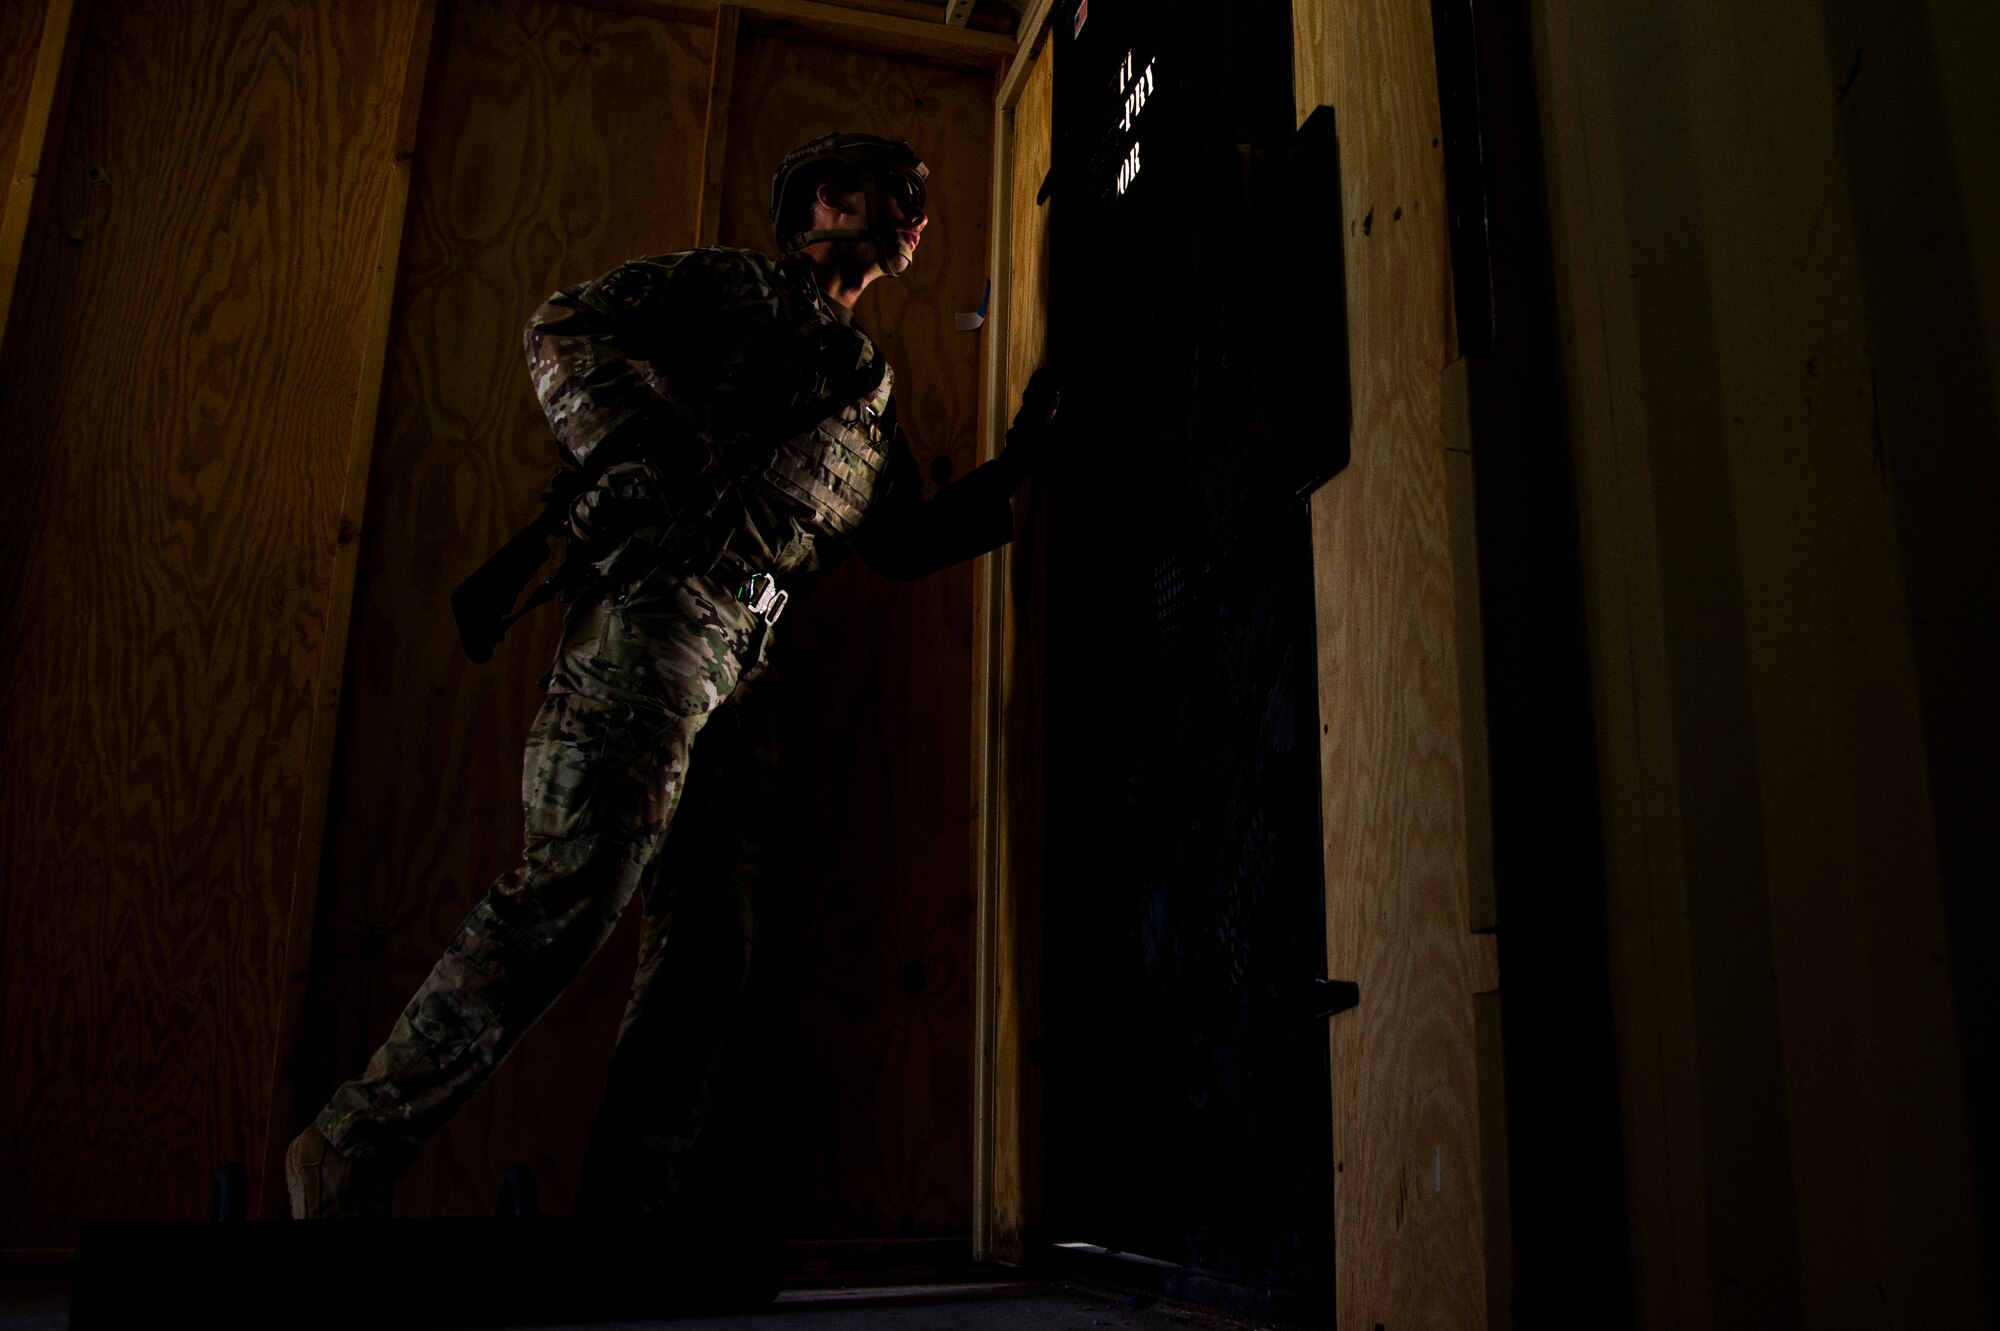 U.S. Air Force Staff Sgt. Chandler Docusen, 49th Security Forces Squadron training instructor, waits for cadre to clear a doorway in a breaching exercise during the first-ever-ever Fire Team Leaders Course at Holloman Air Force Base, New Mexico, March 1, 2023. The FTLC course allowed Airmen to learn the basics of breaching entryways with specialized equipment along with the foundational steps to effectively conduct close-quarters combat. (U.S. Air Force photo by Senior Airman Antonio Salfran)